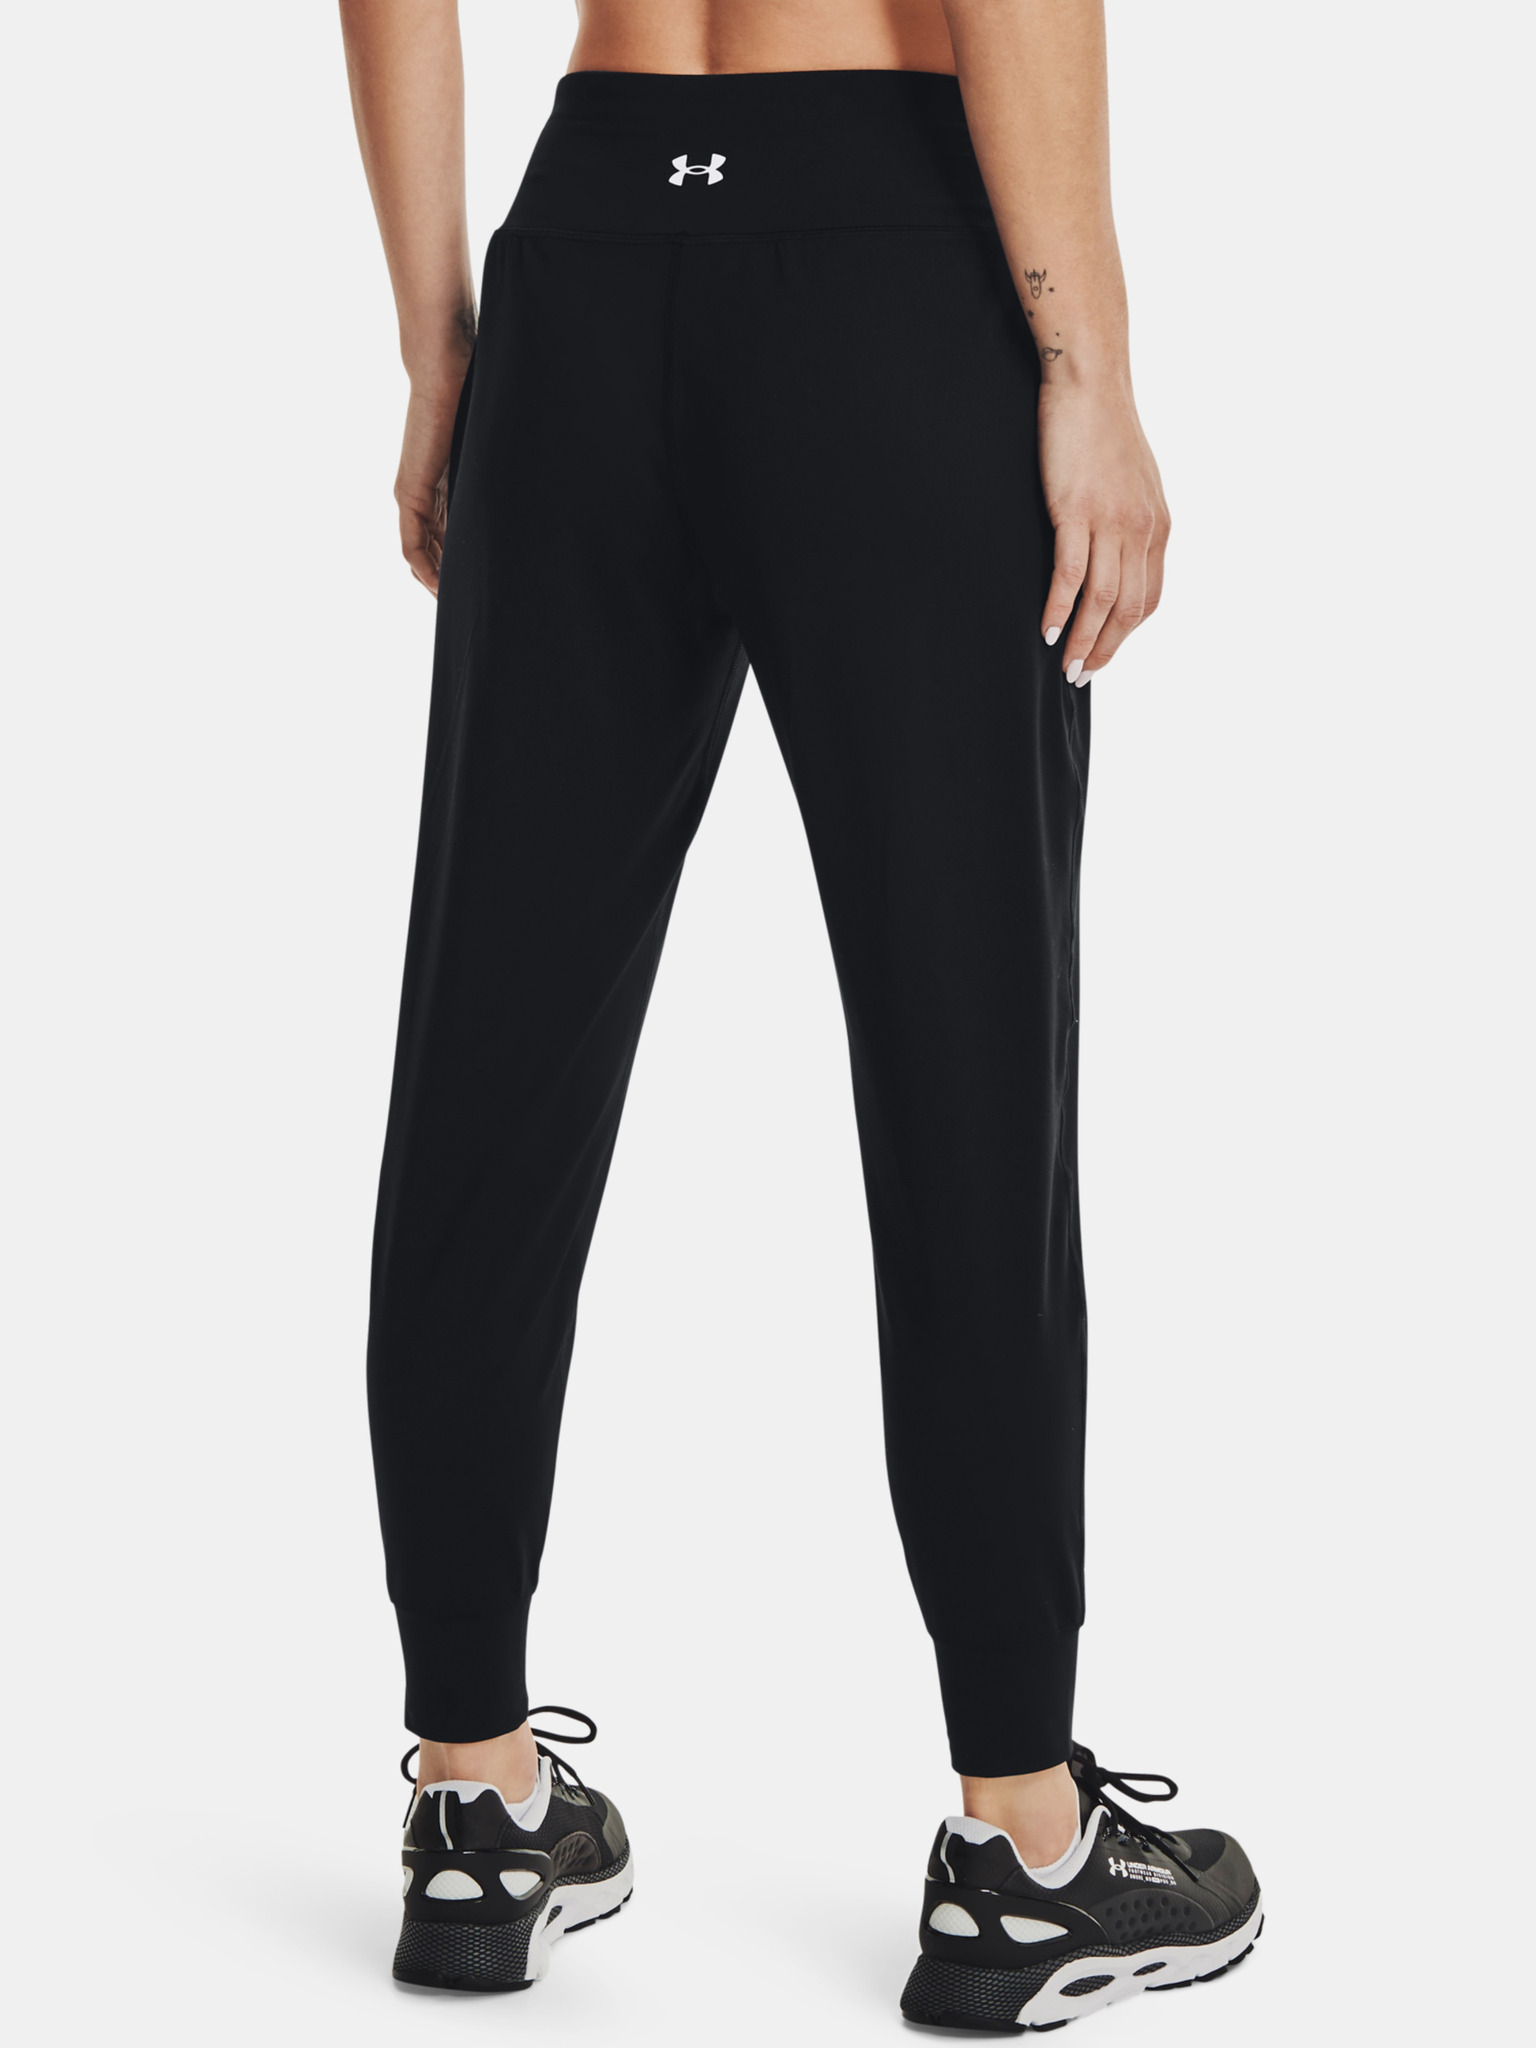 Under Armour Meridian joggers in black